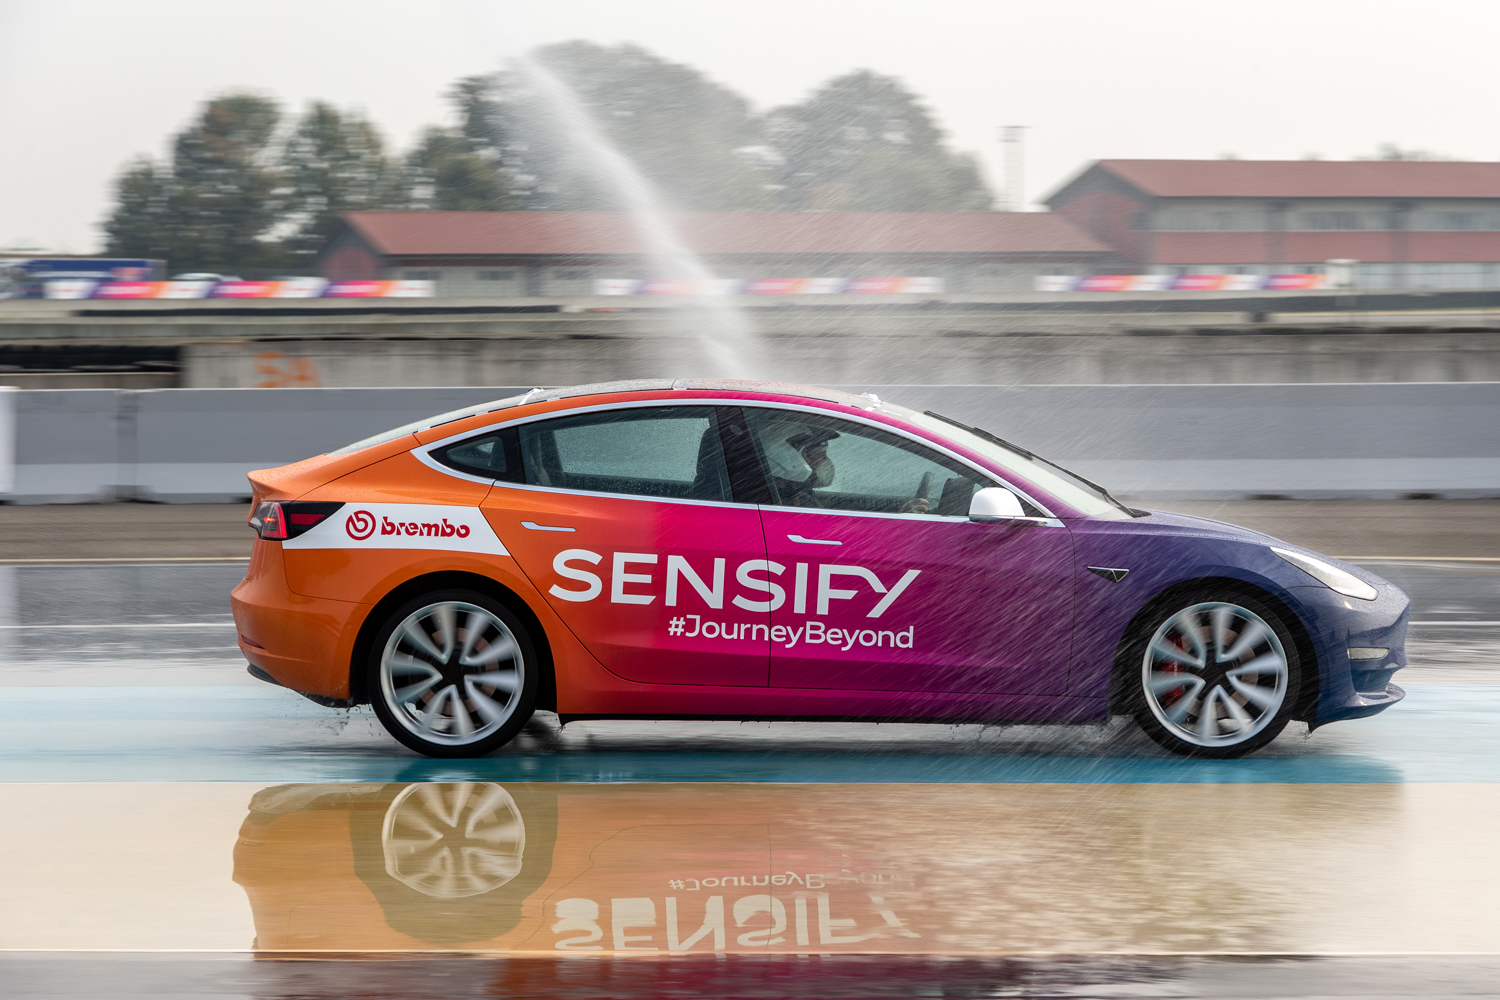 Complete Car Features | Will Brembo Sensify revolutionise braking?